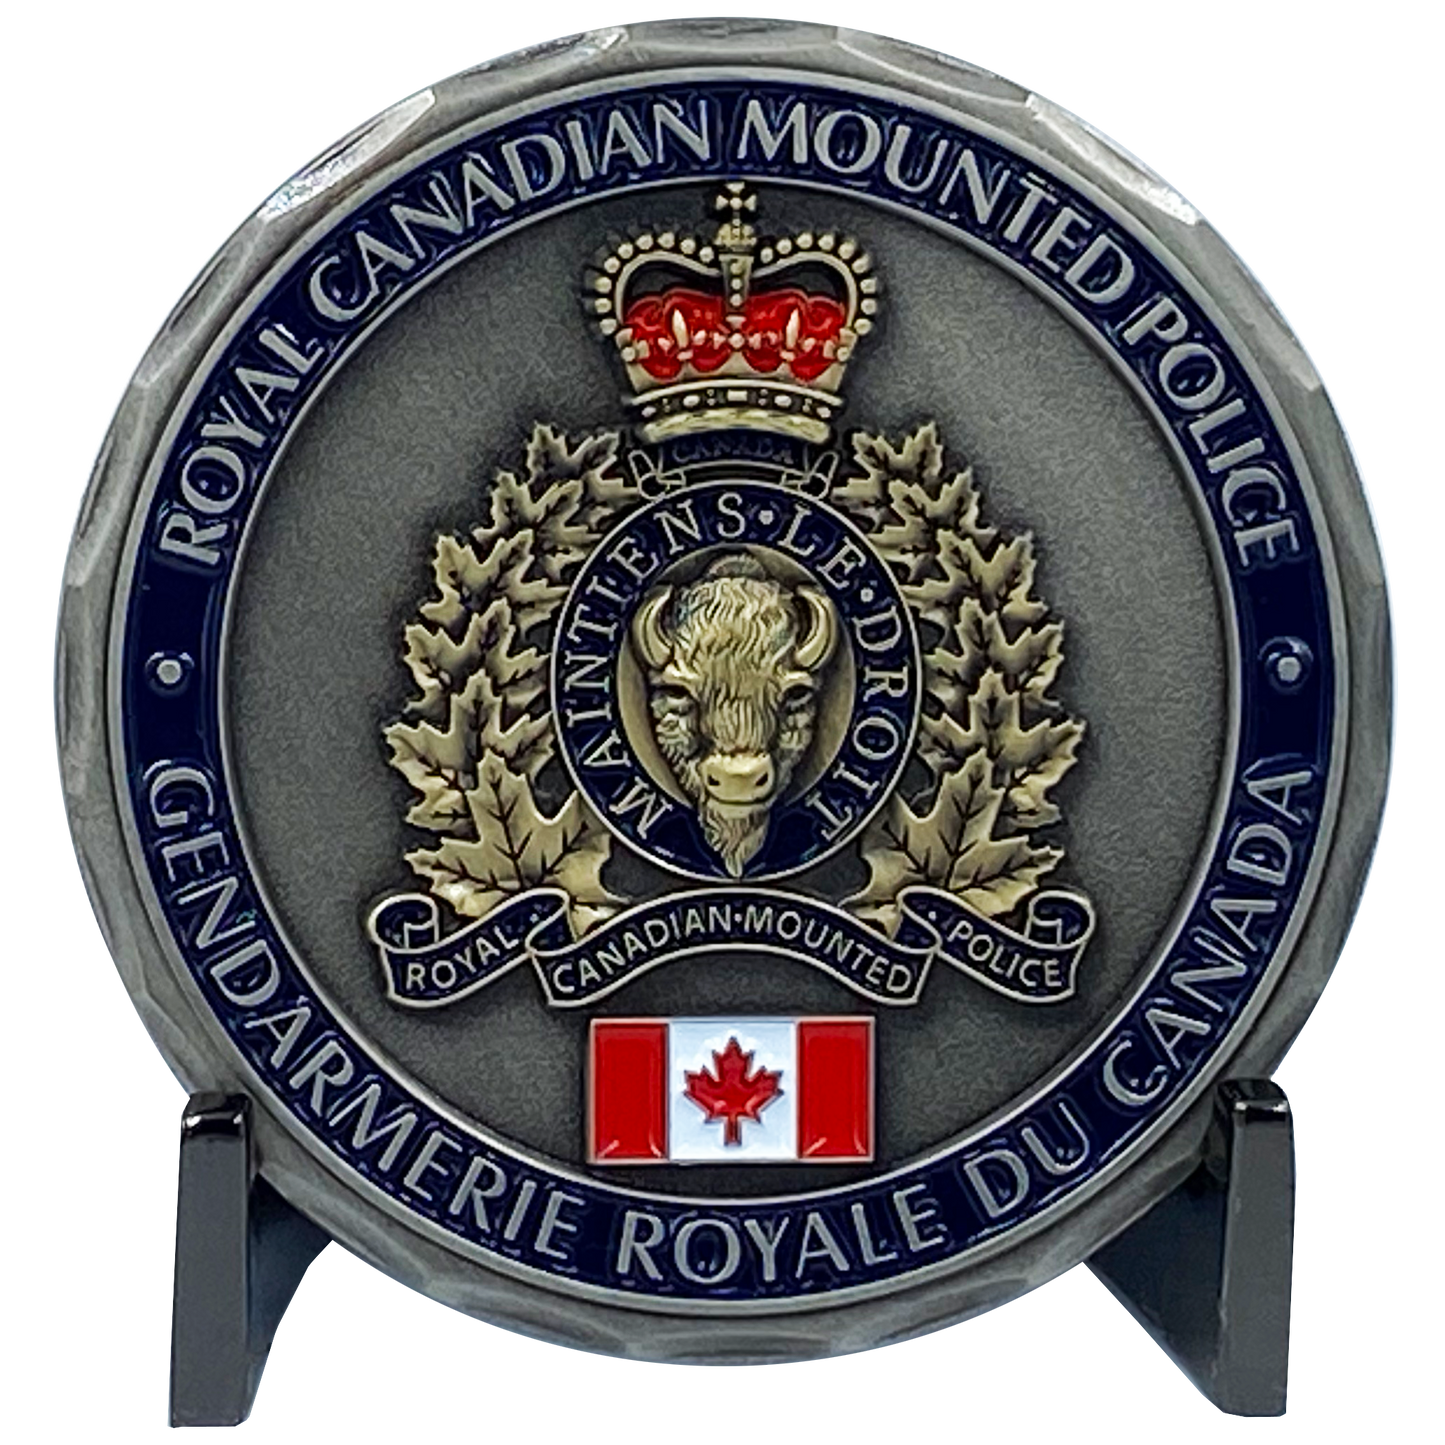 DL3-05 Royal Canadian Mounted Police Canada Thin Blue Line RCMP Challenge Coin